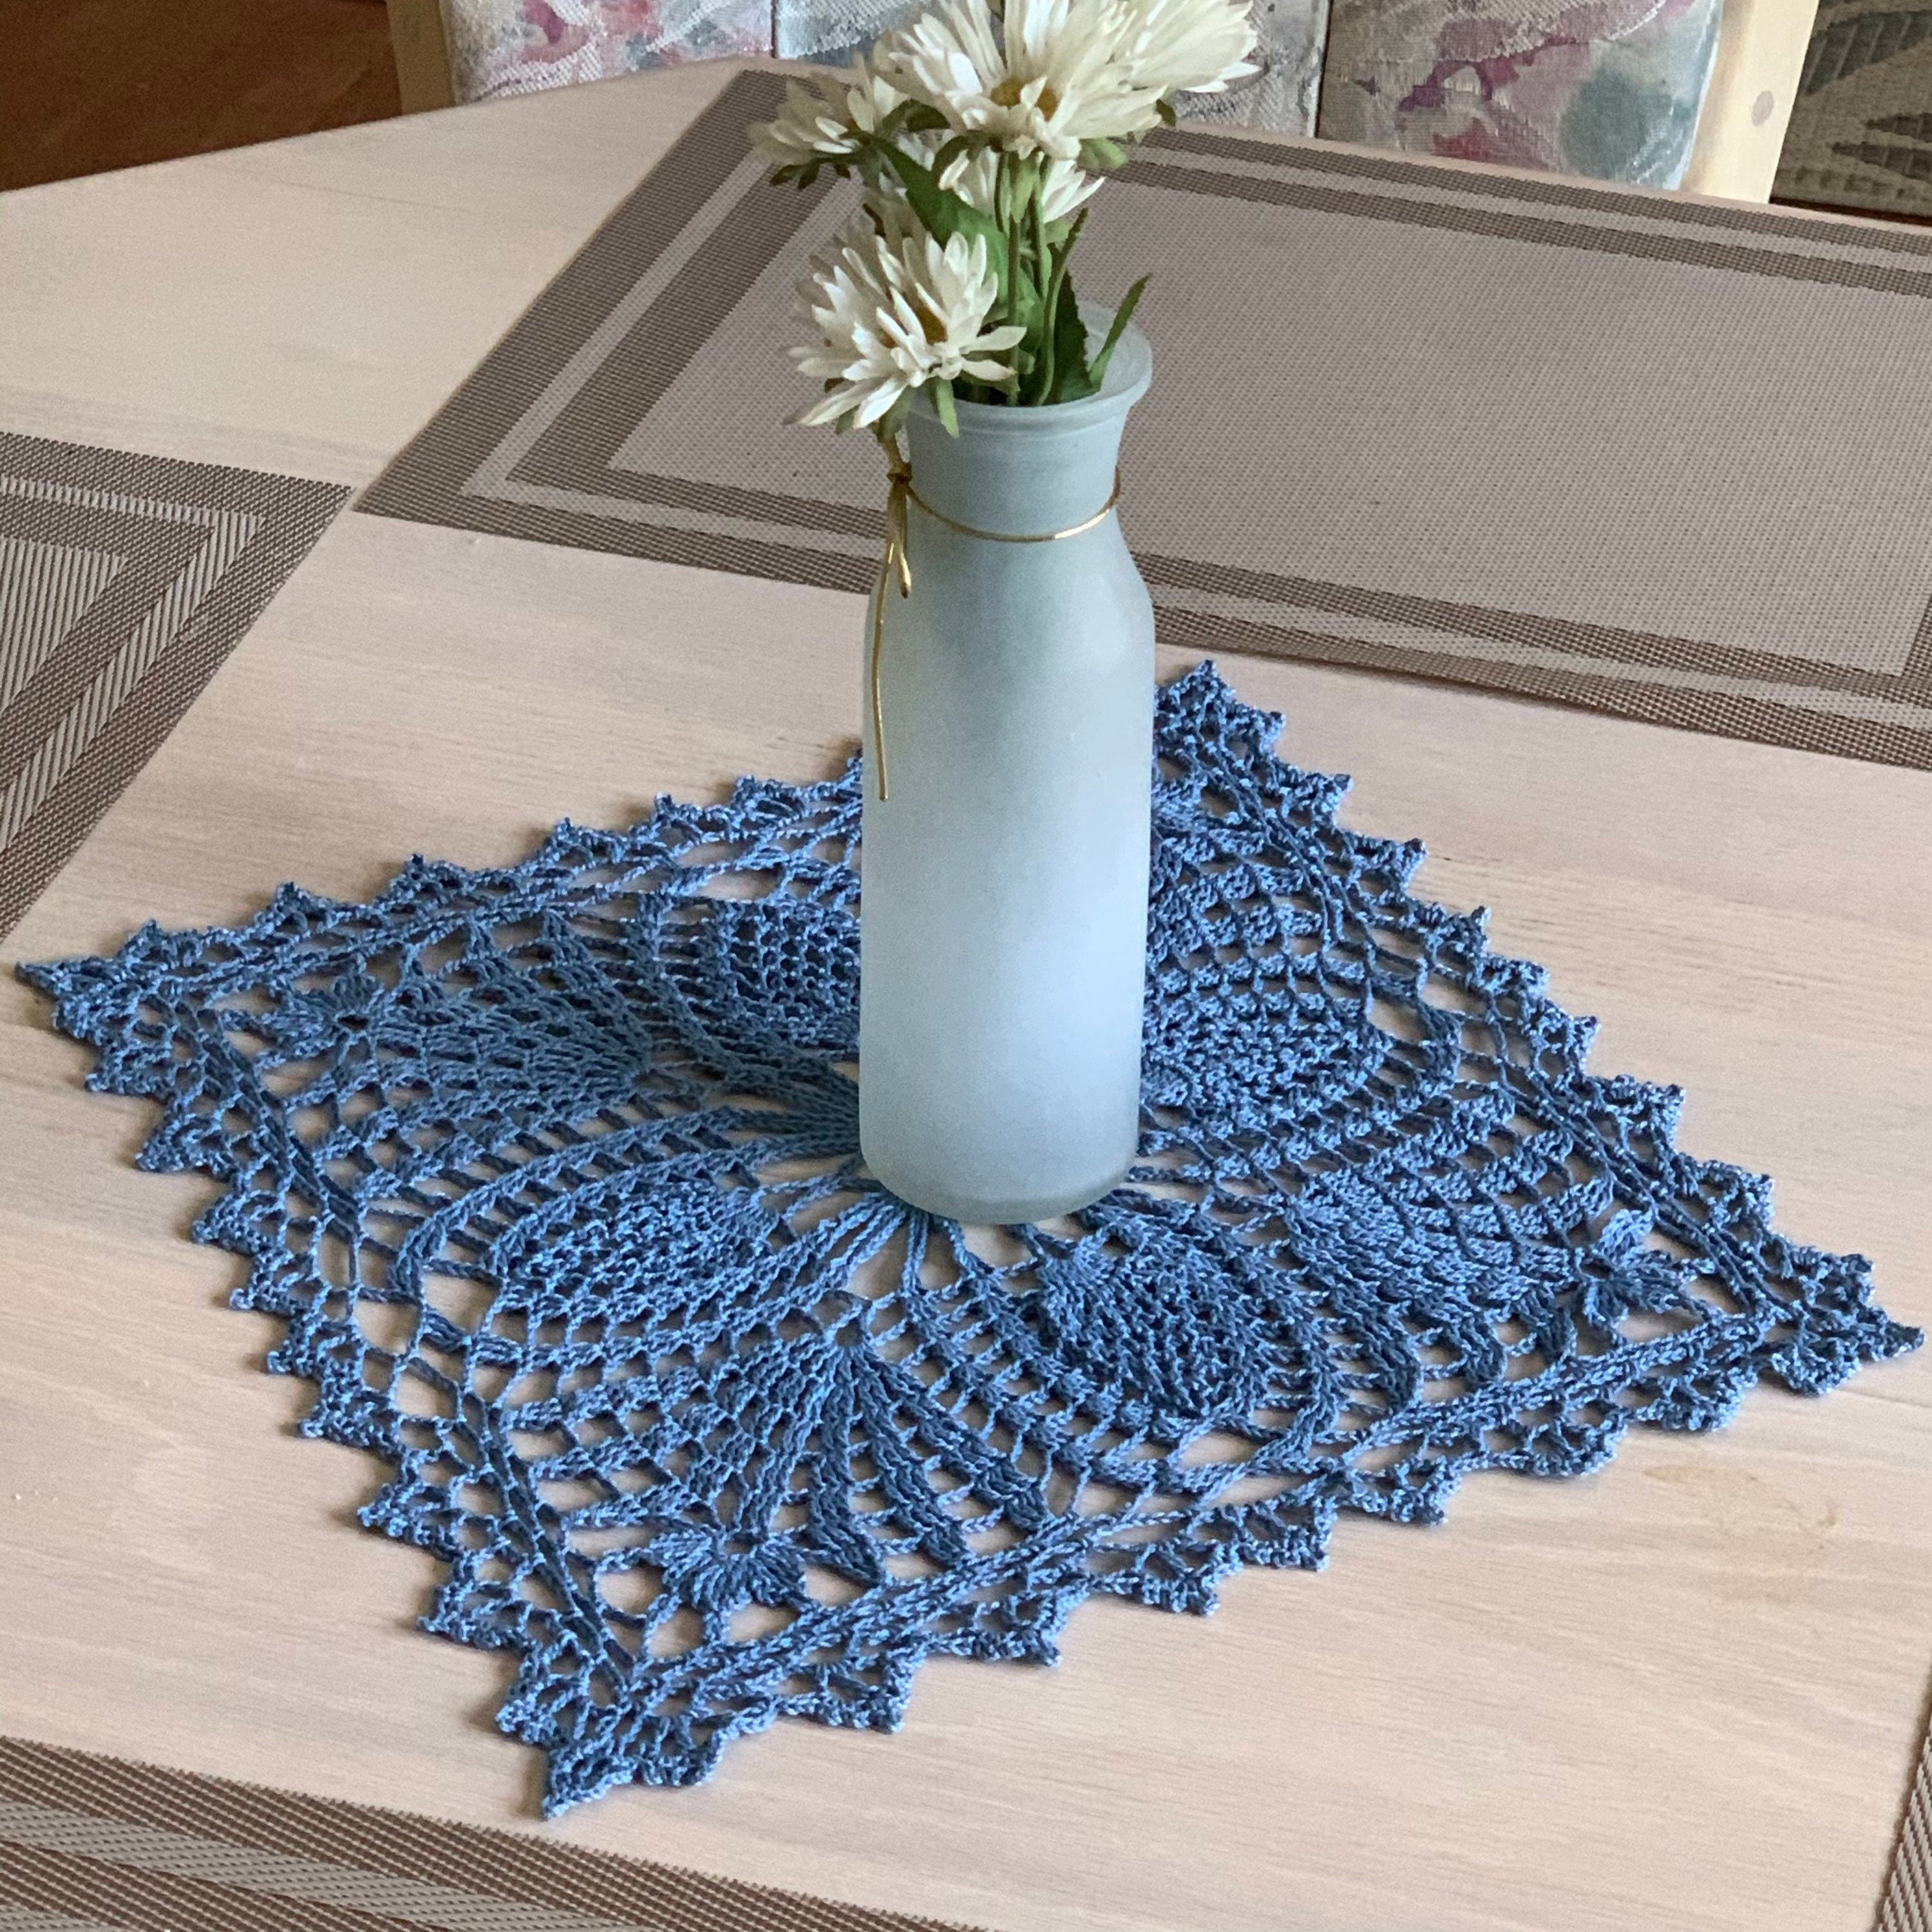 Country Blue 12“ Square Doily -Crocheted Doily-Table Decoration